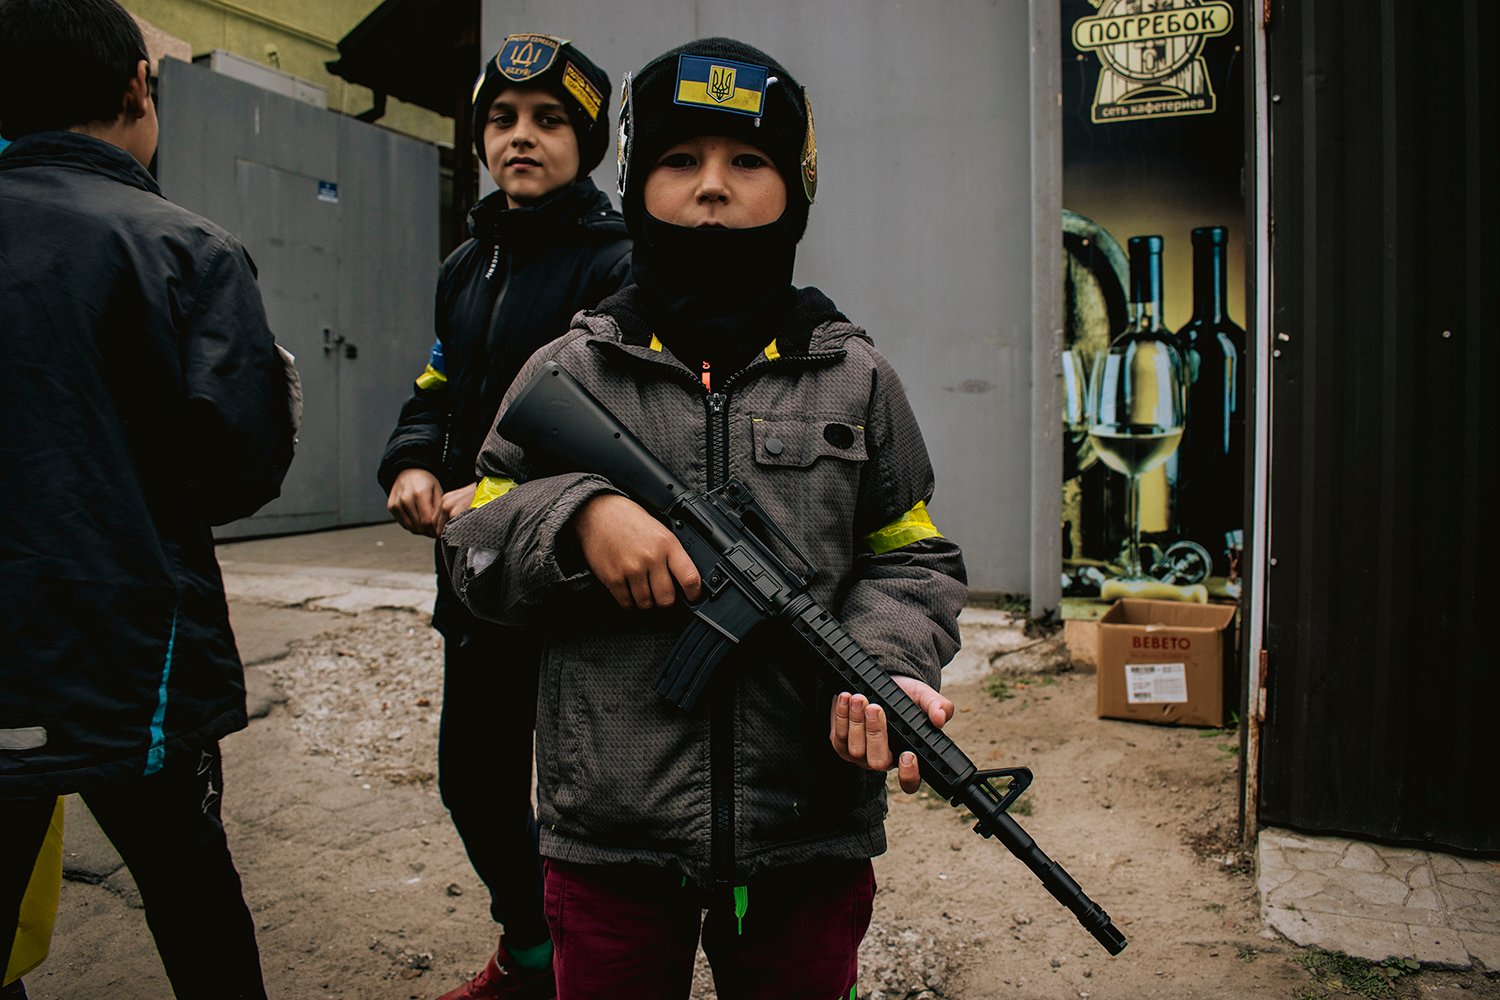 Young boys dress up as Ukrainian soldiers and police officers.